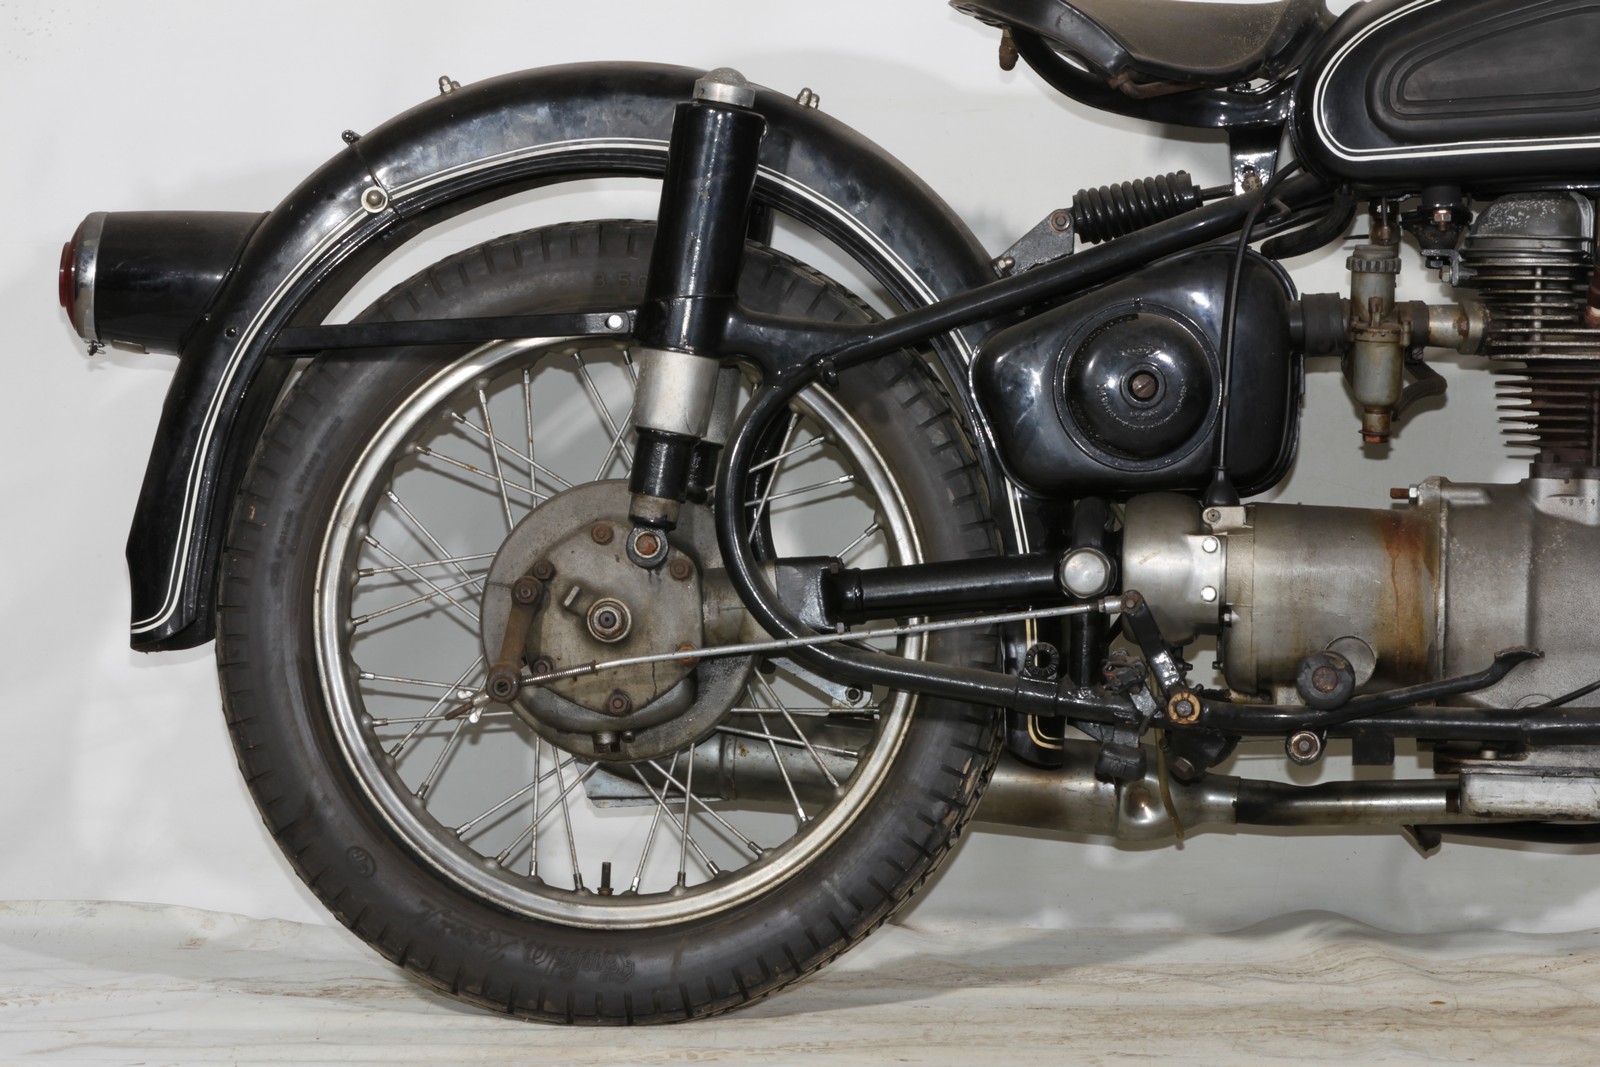 1960s BMW R27 247cc OHV Shaft Drive - Image 8 of 8